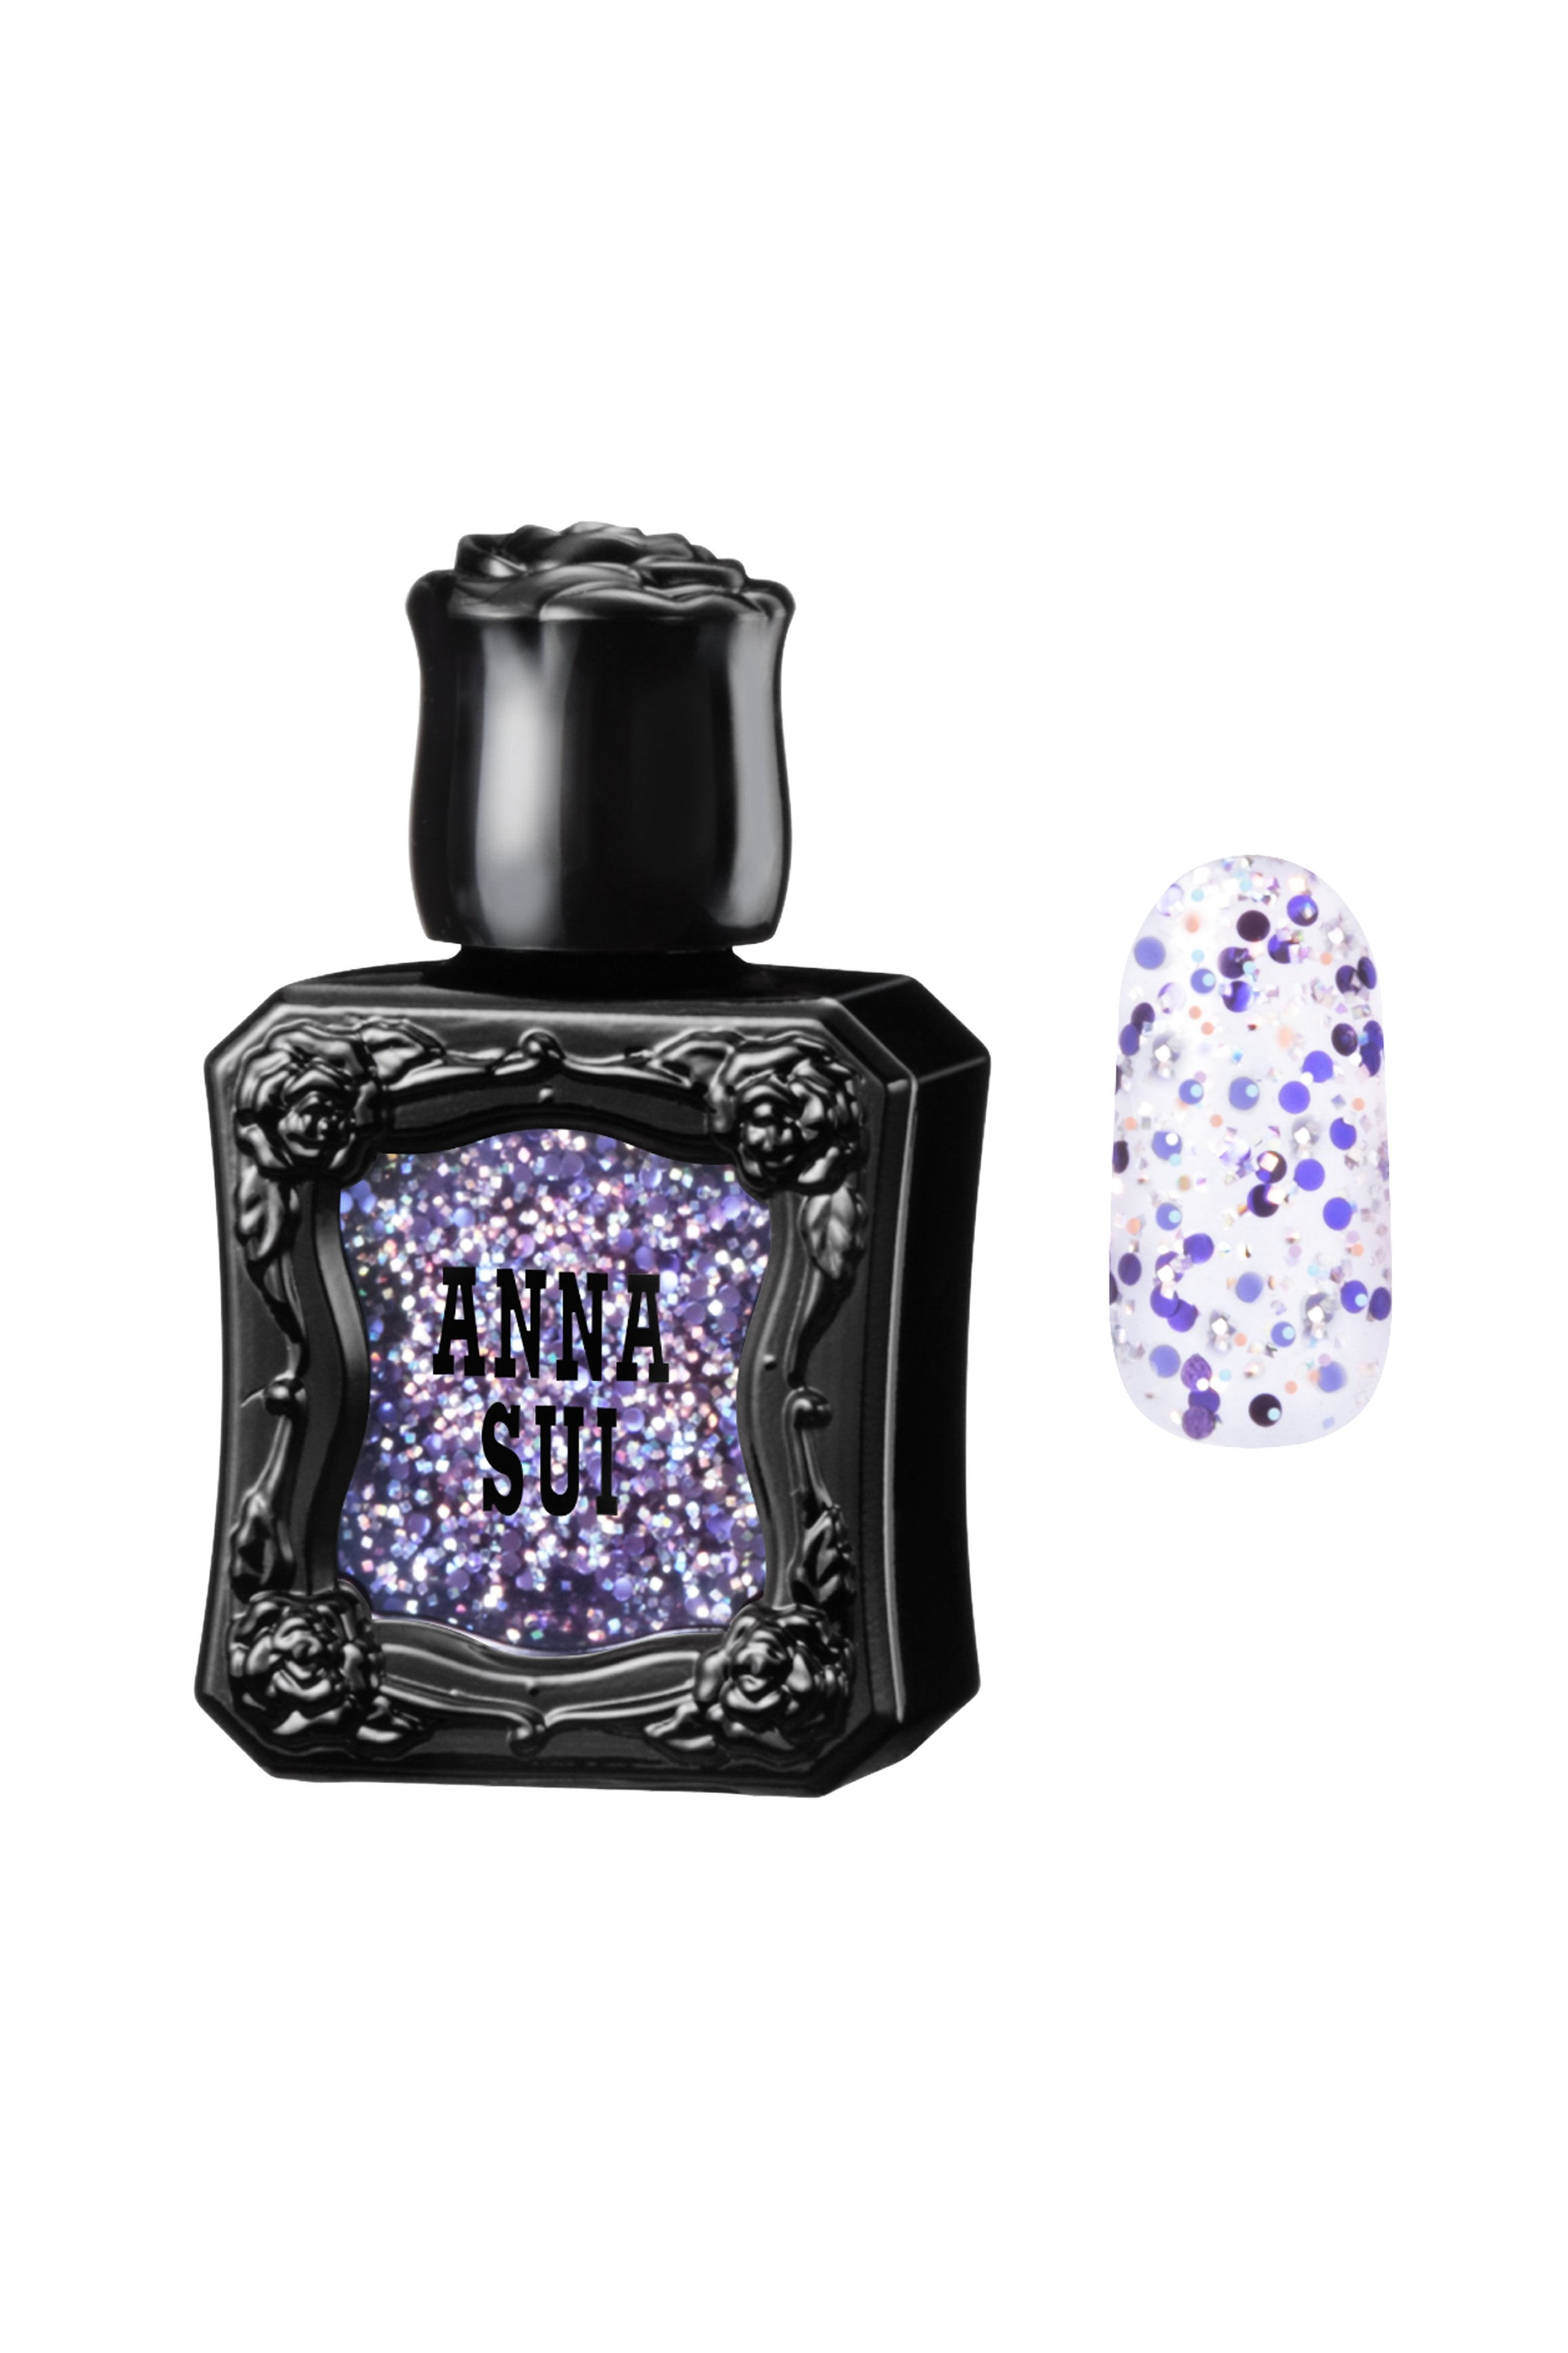 Inspired by the fragrance bottle, black container with raised rose pattern, Anna Sui on Purple Punch